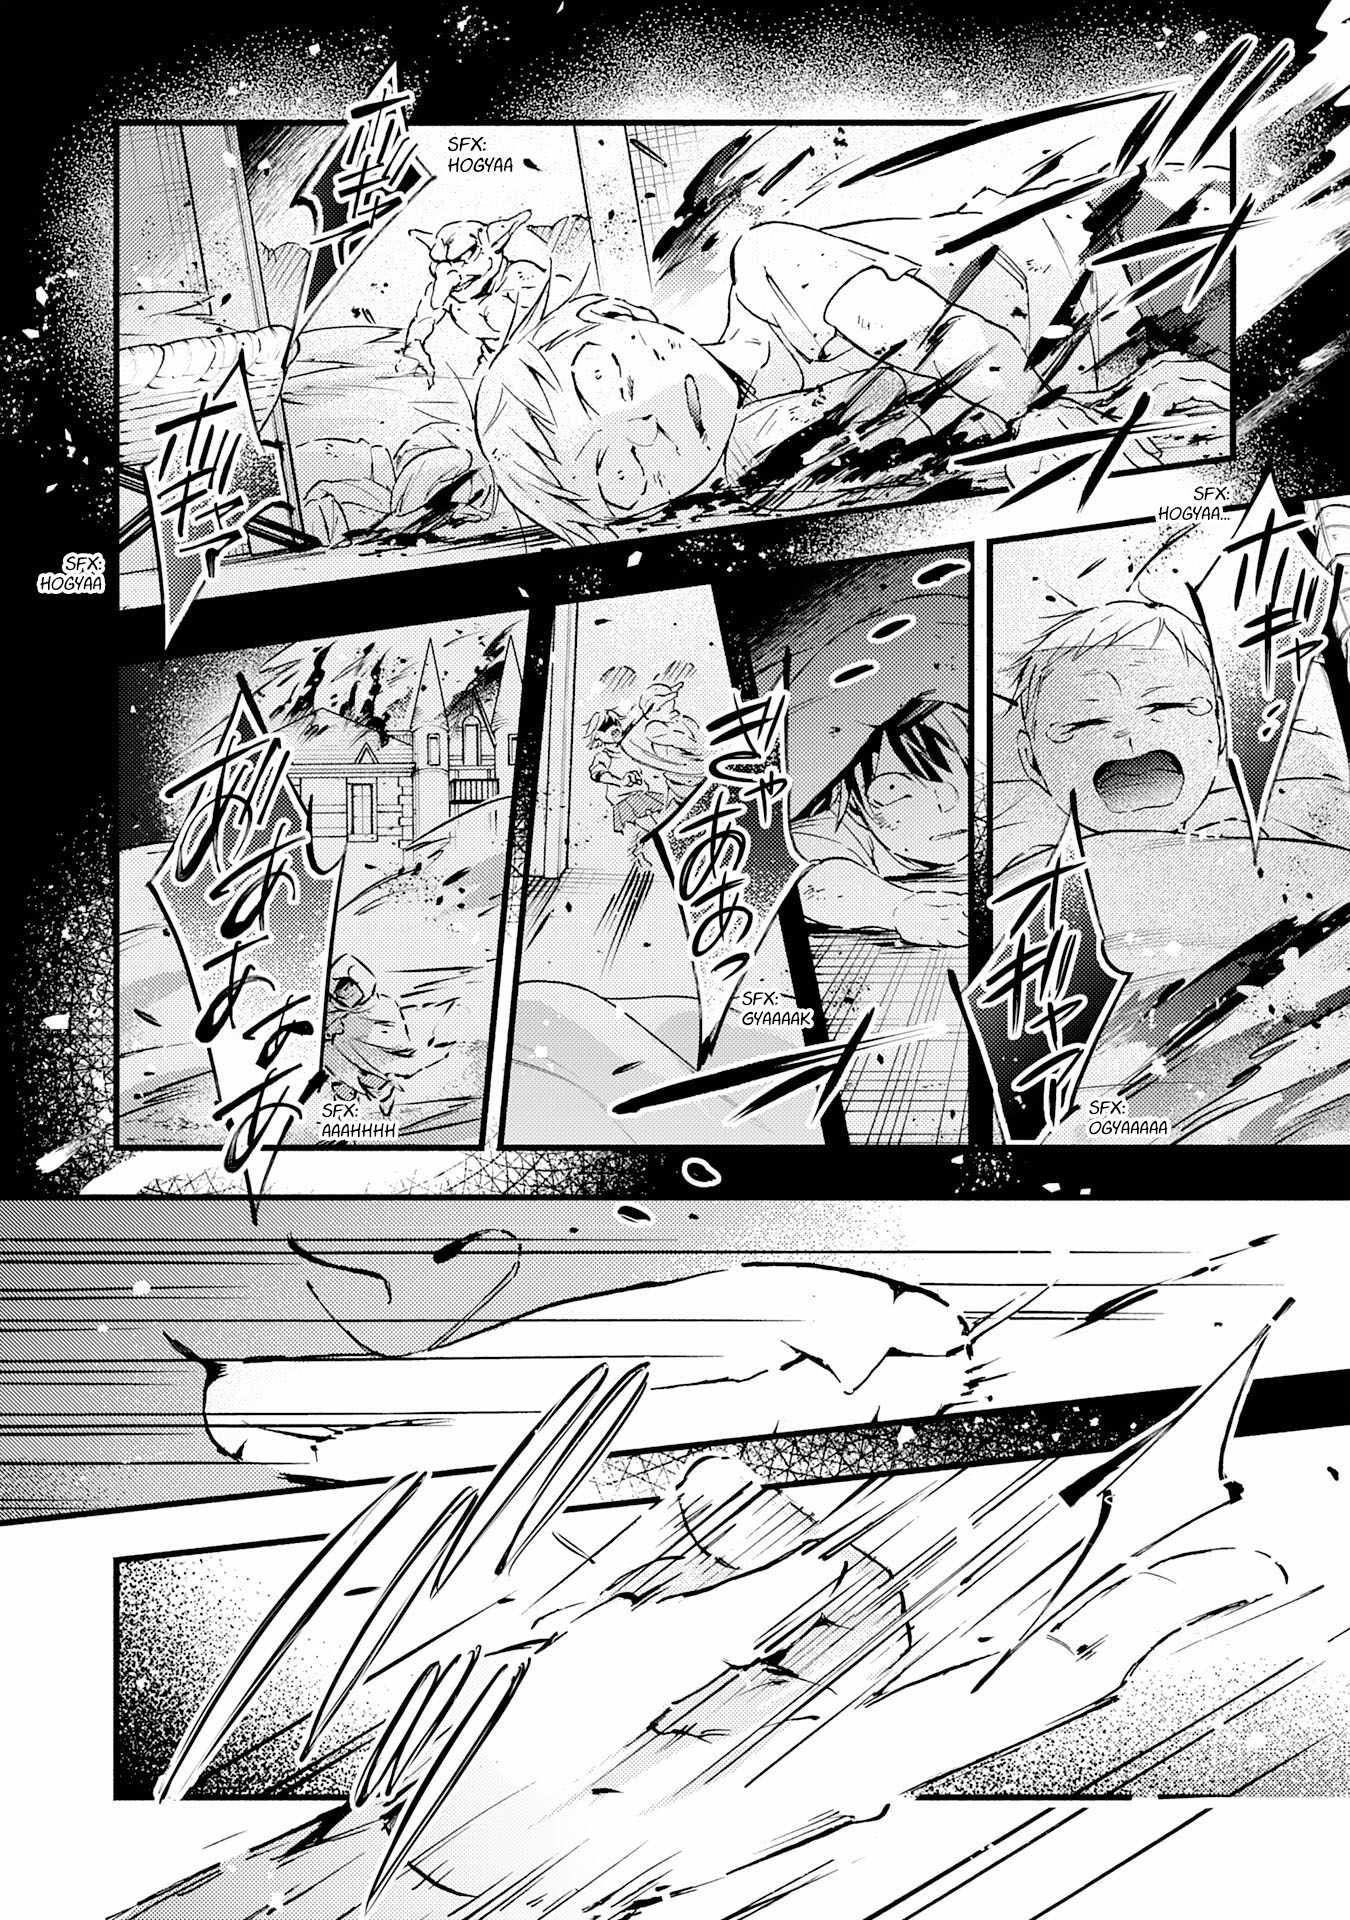 read The Solo Necromancer Who Leads an Immortal Army Transfers to Become an Sss-Rank Adventurer Chapter 18 Manga Online Free at Mangabuddy, MangaNato,Manhwatop | MangaSo.com